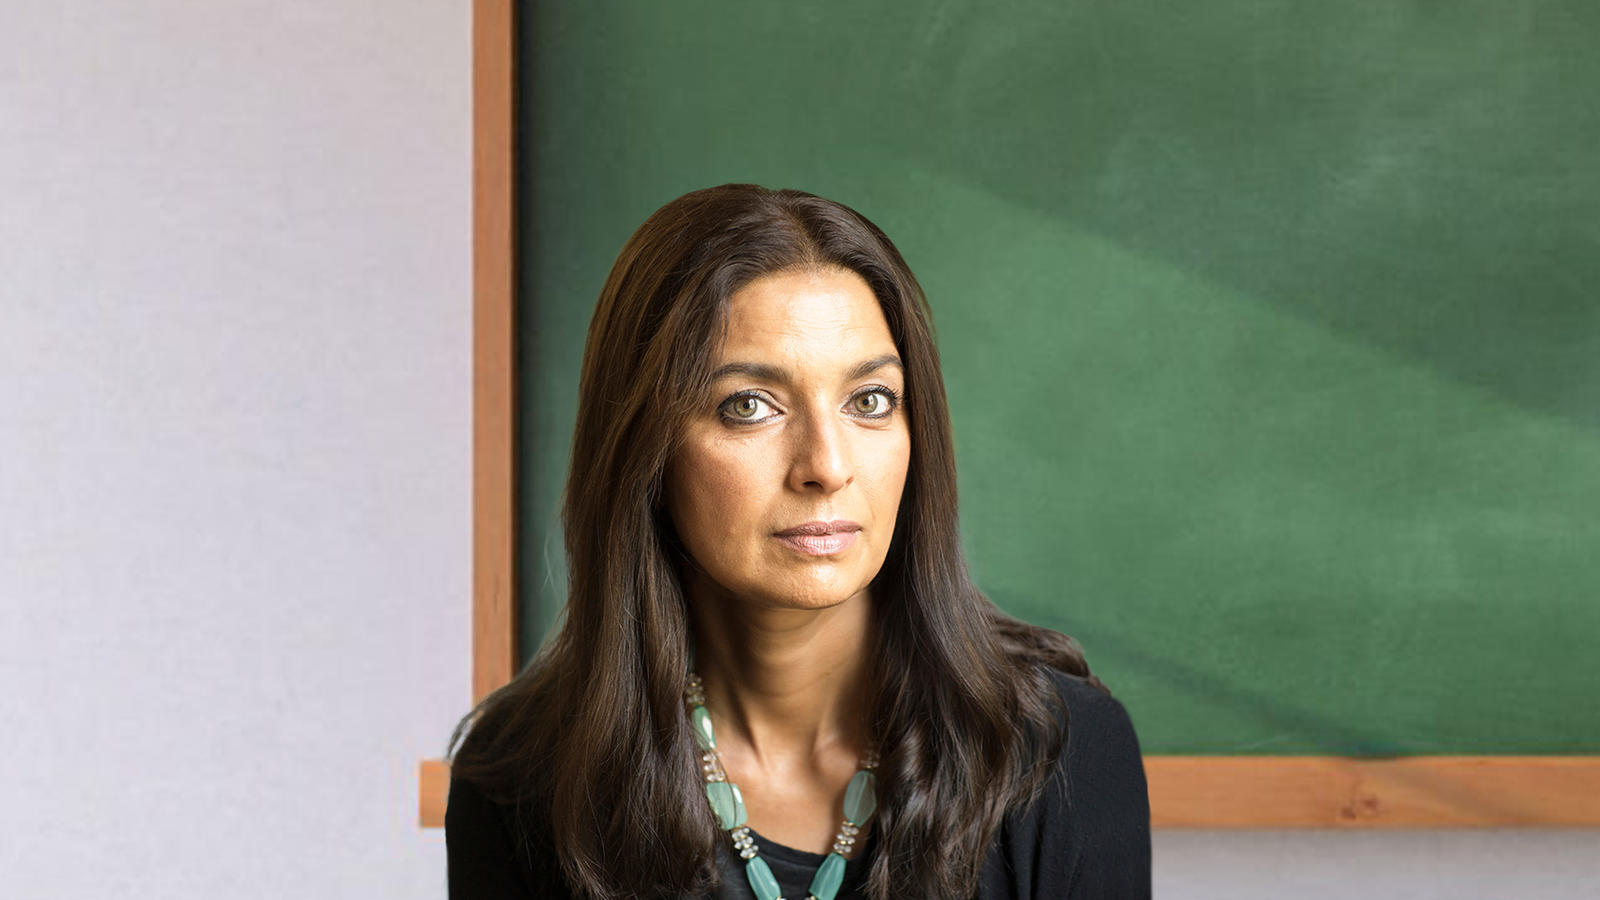 Photo of Bengali American woman, Jhumpa Lahiri, in a dark sweater and turquoise necklace in front of a chalkboard